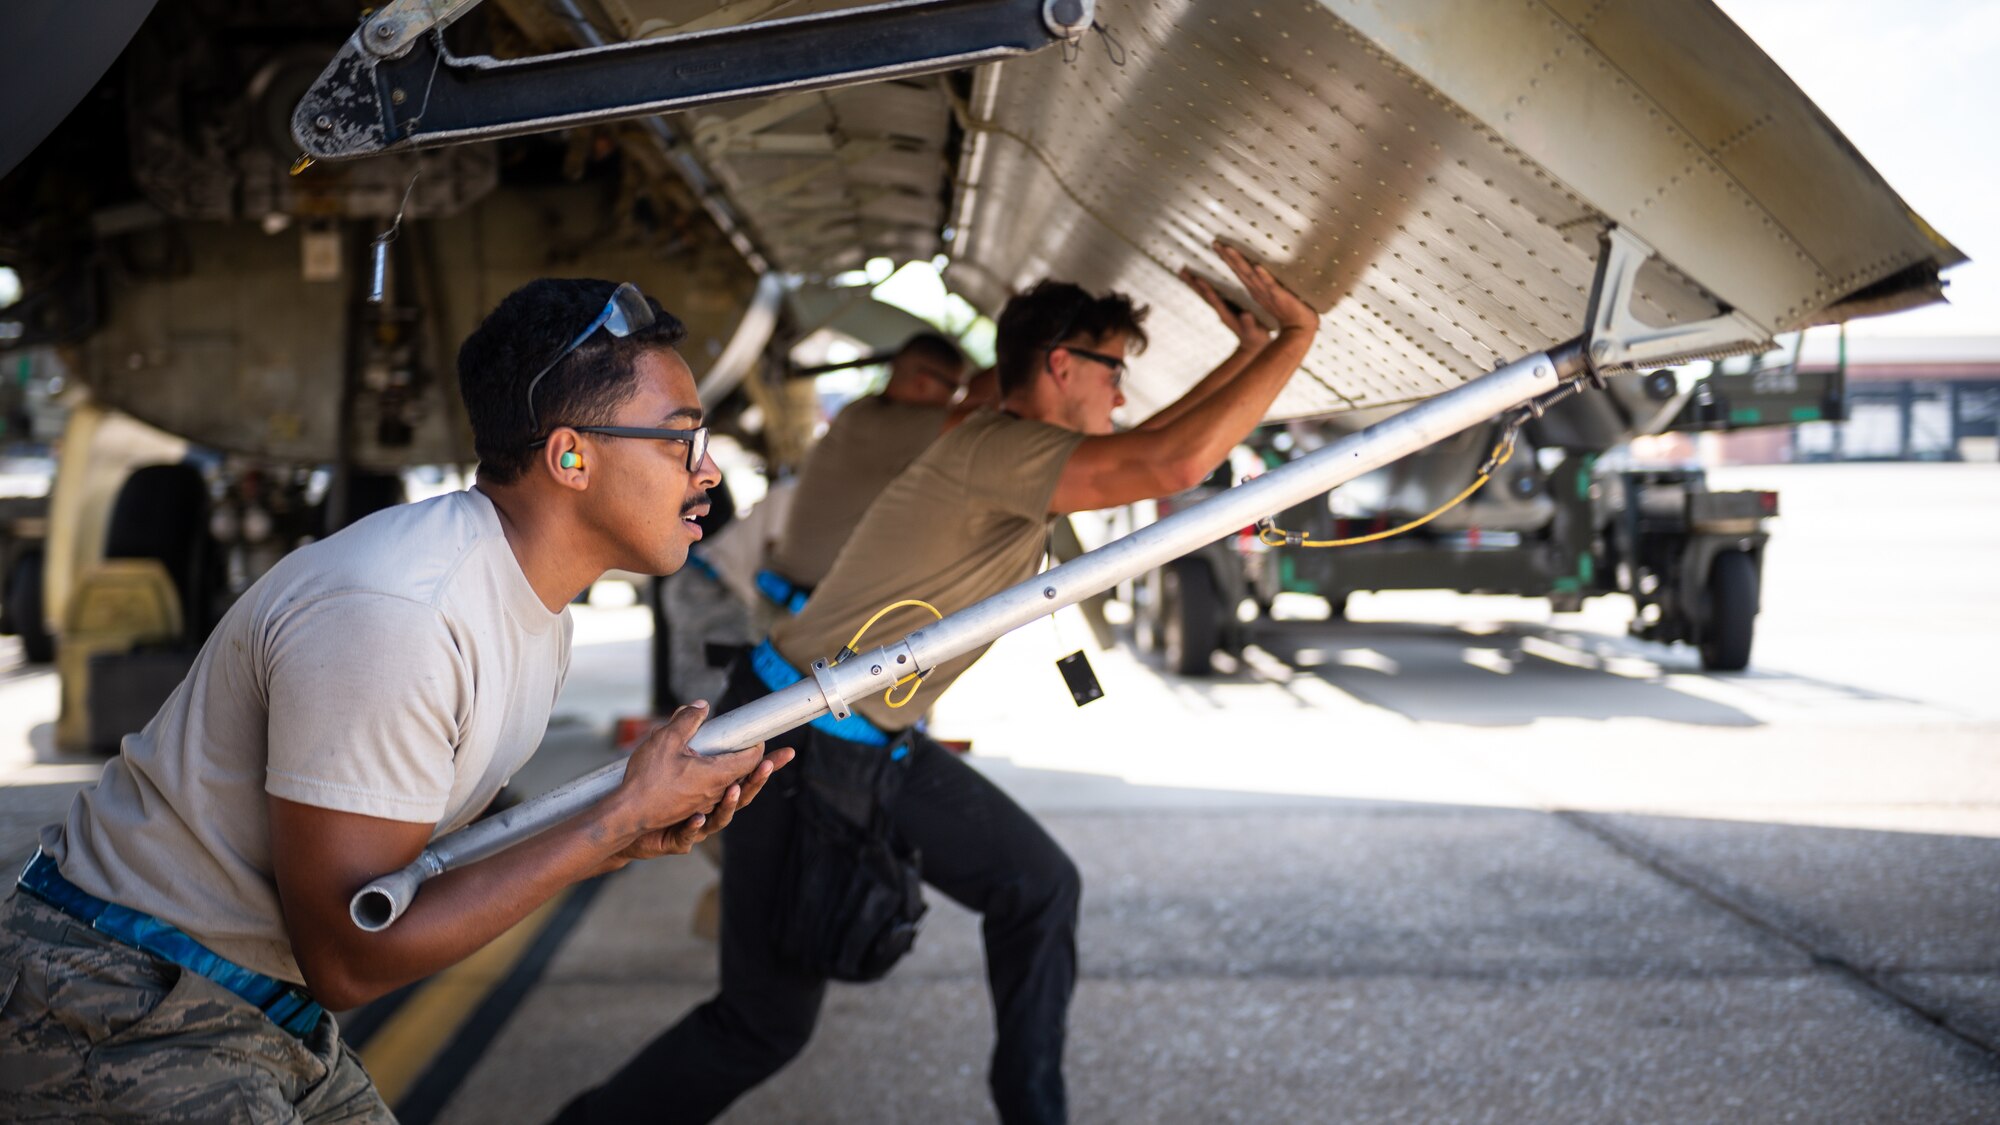 Senior Airman Timothy Pierce, 20th Aircraft Maintenance Unit weapons load crew member, lifts a B-52H Stratofortress bomb bay door at Barksdale Air Force Base, La., at Barksdale Air Force Base, La., Aug. 24, 2020. The equipment for testing is attached to the warhead and is able to record timing and voltages across the warhead, missile and the aircraft. (U.S. Air Force photo by Senior Airman Lillian Miller)